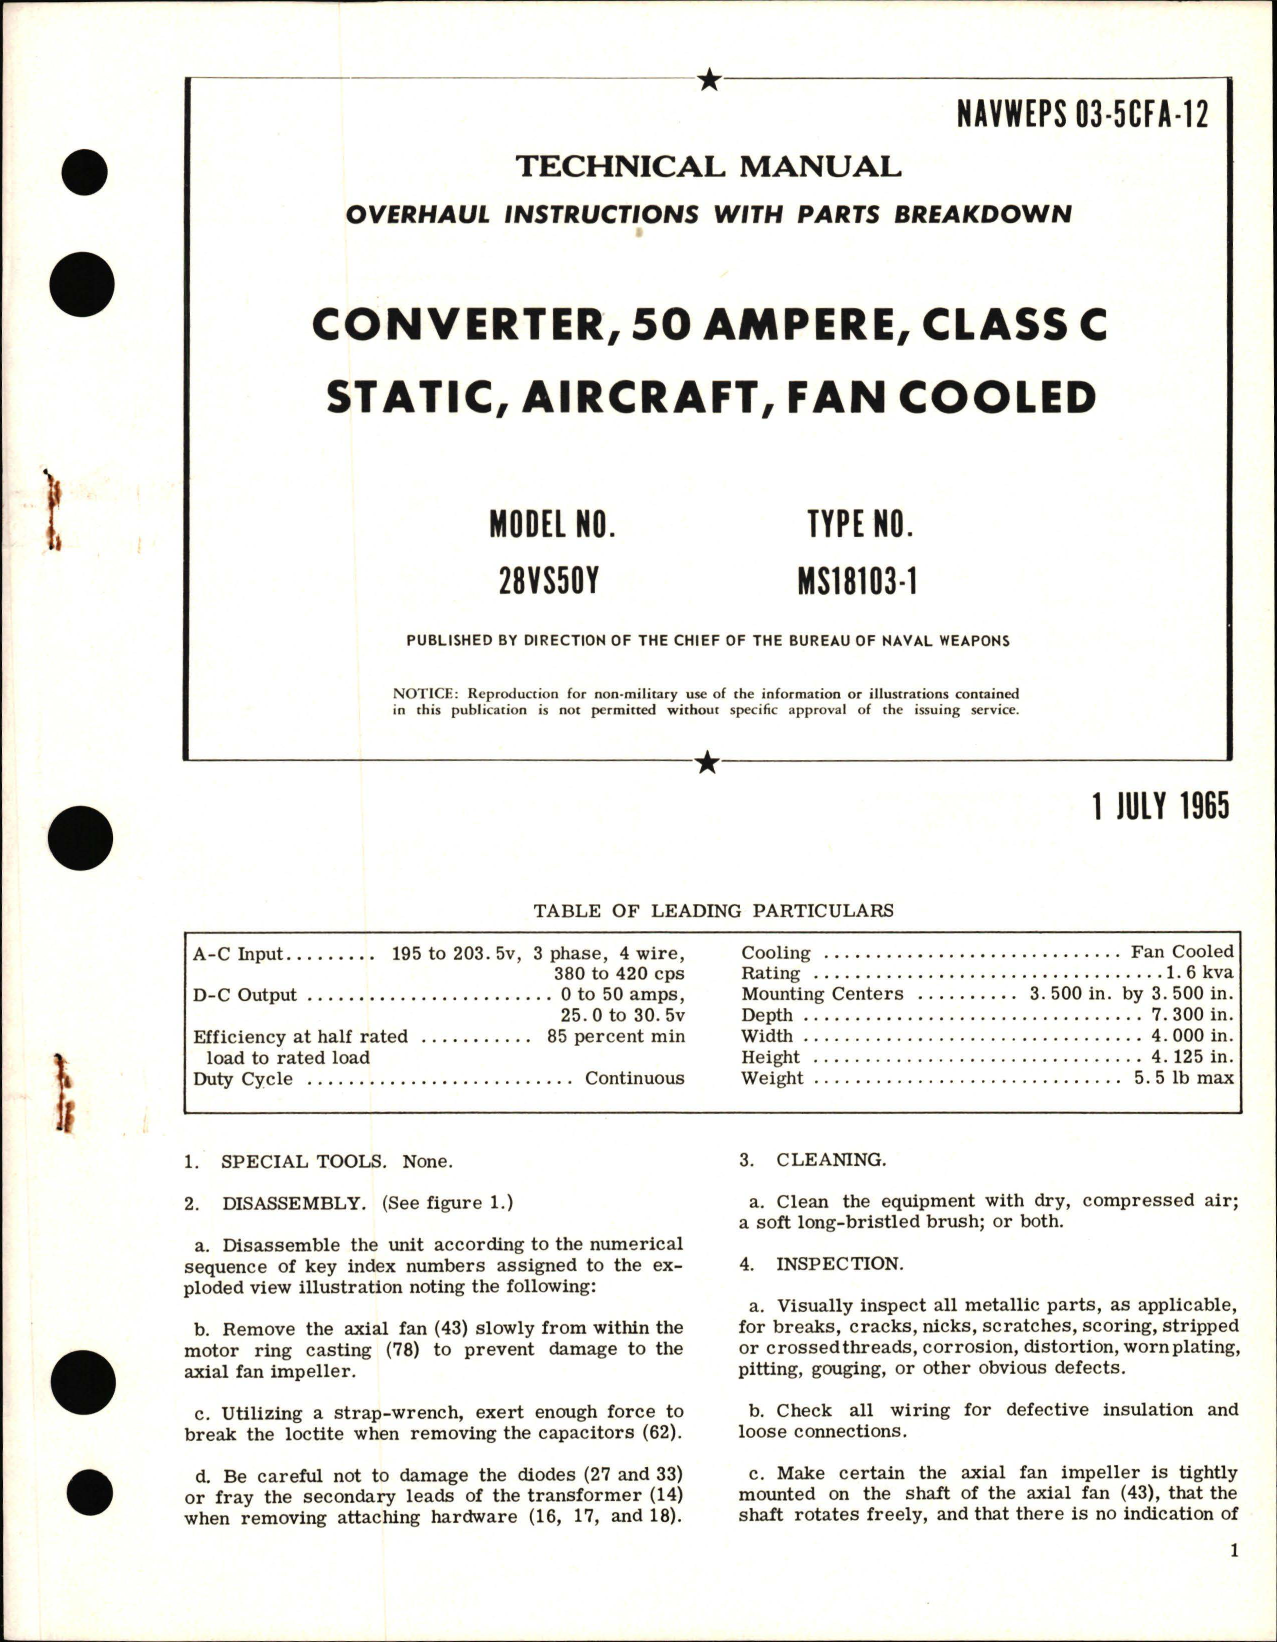 Sample page 1 from AirCorps Library document: Overhaul Instructions with Parts Breakdown for Class C Converter, 50 Ampere, Static, Aircraft, Fan Cooled - Model 28VS50Y - Type MS18103-1